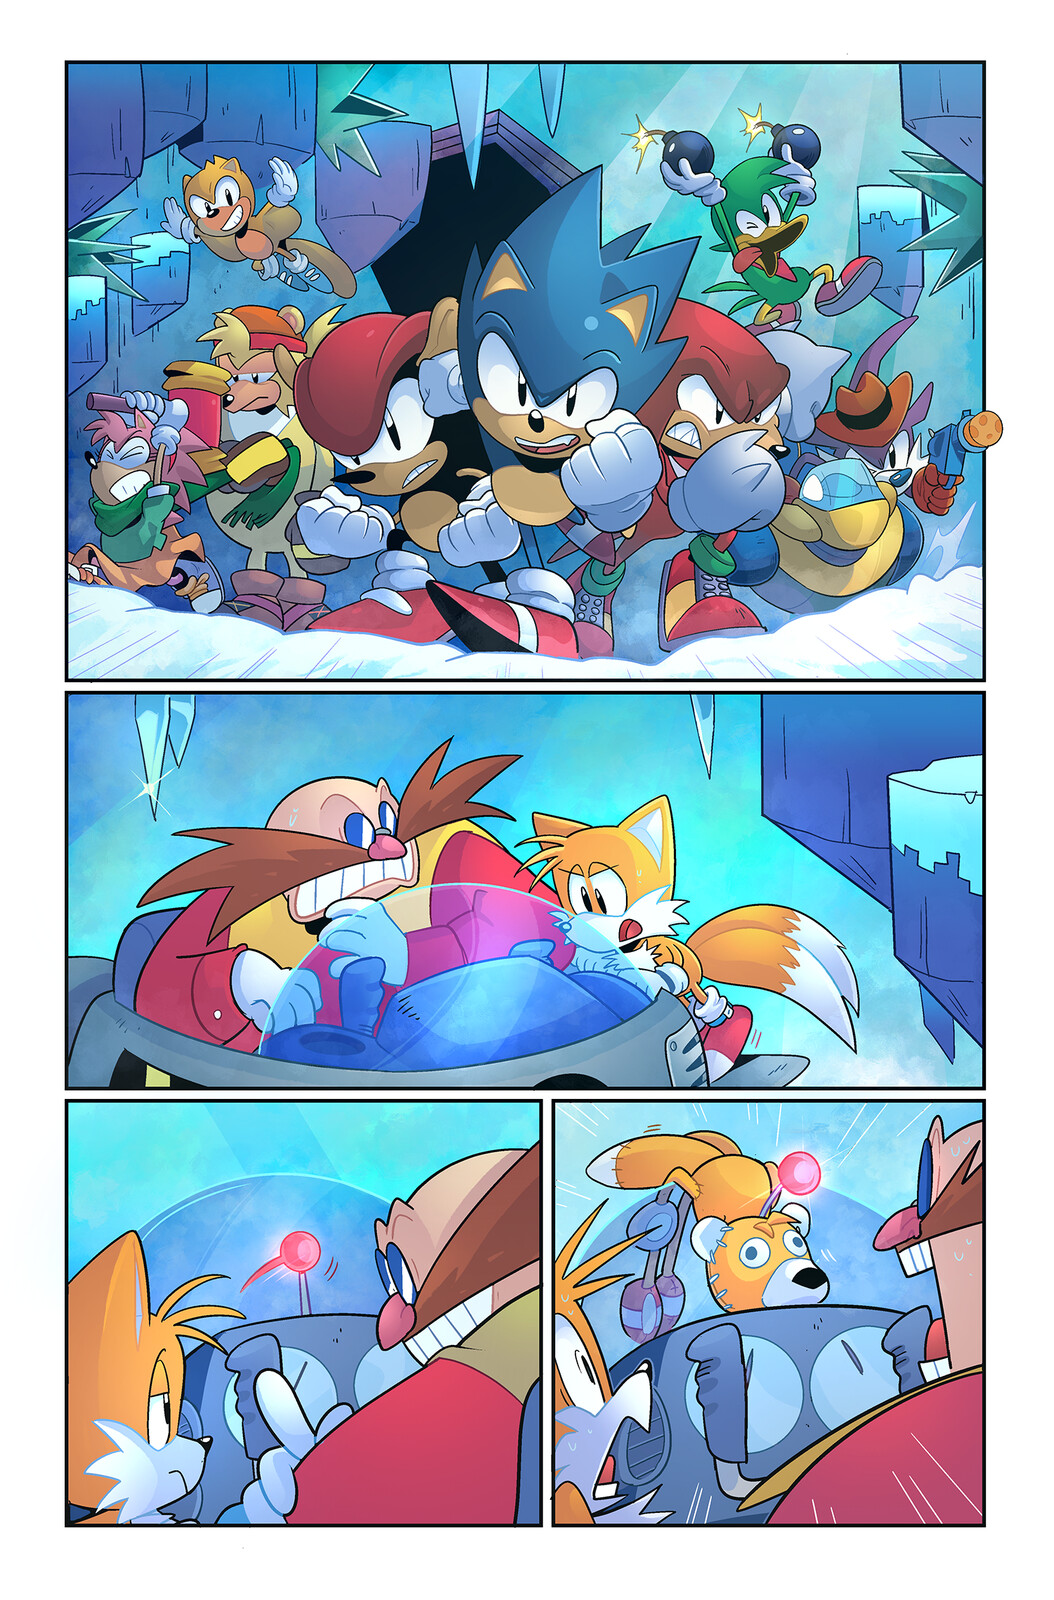 Color practice using lineart from the 30th Anniversary IDW Sonic comic.
Lines by Thomas Rothlisberger.
Colors by me.